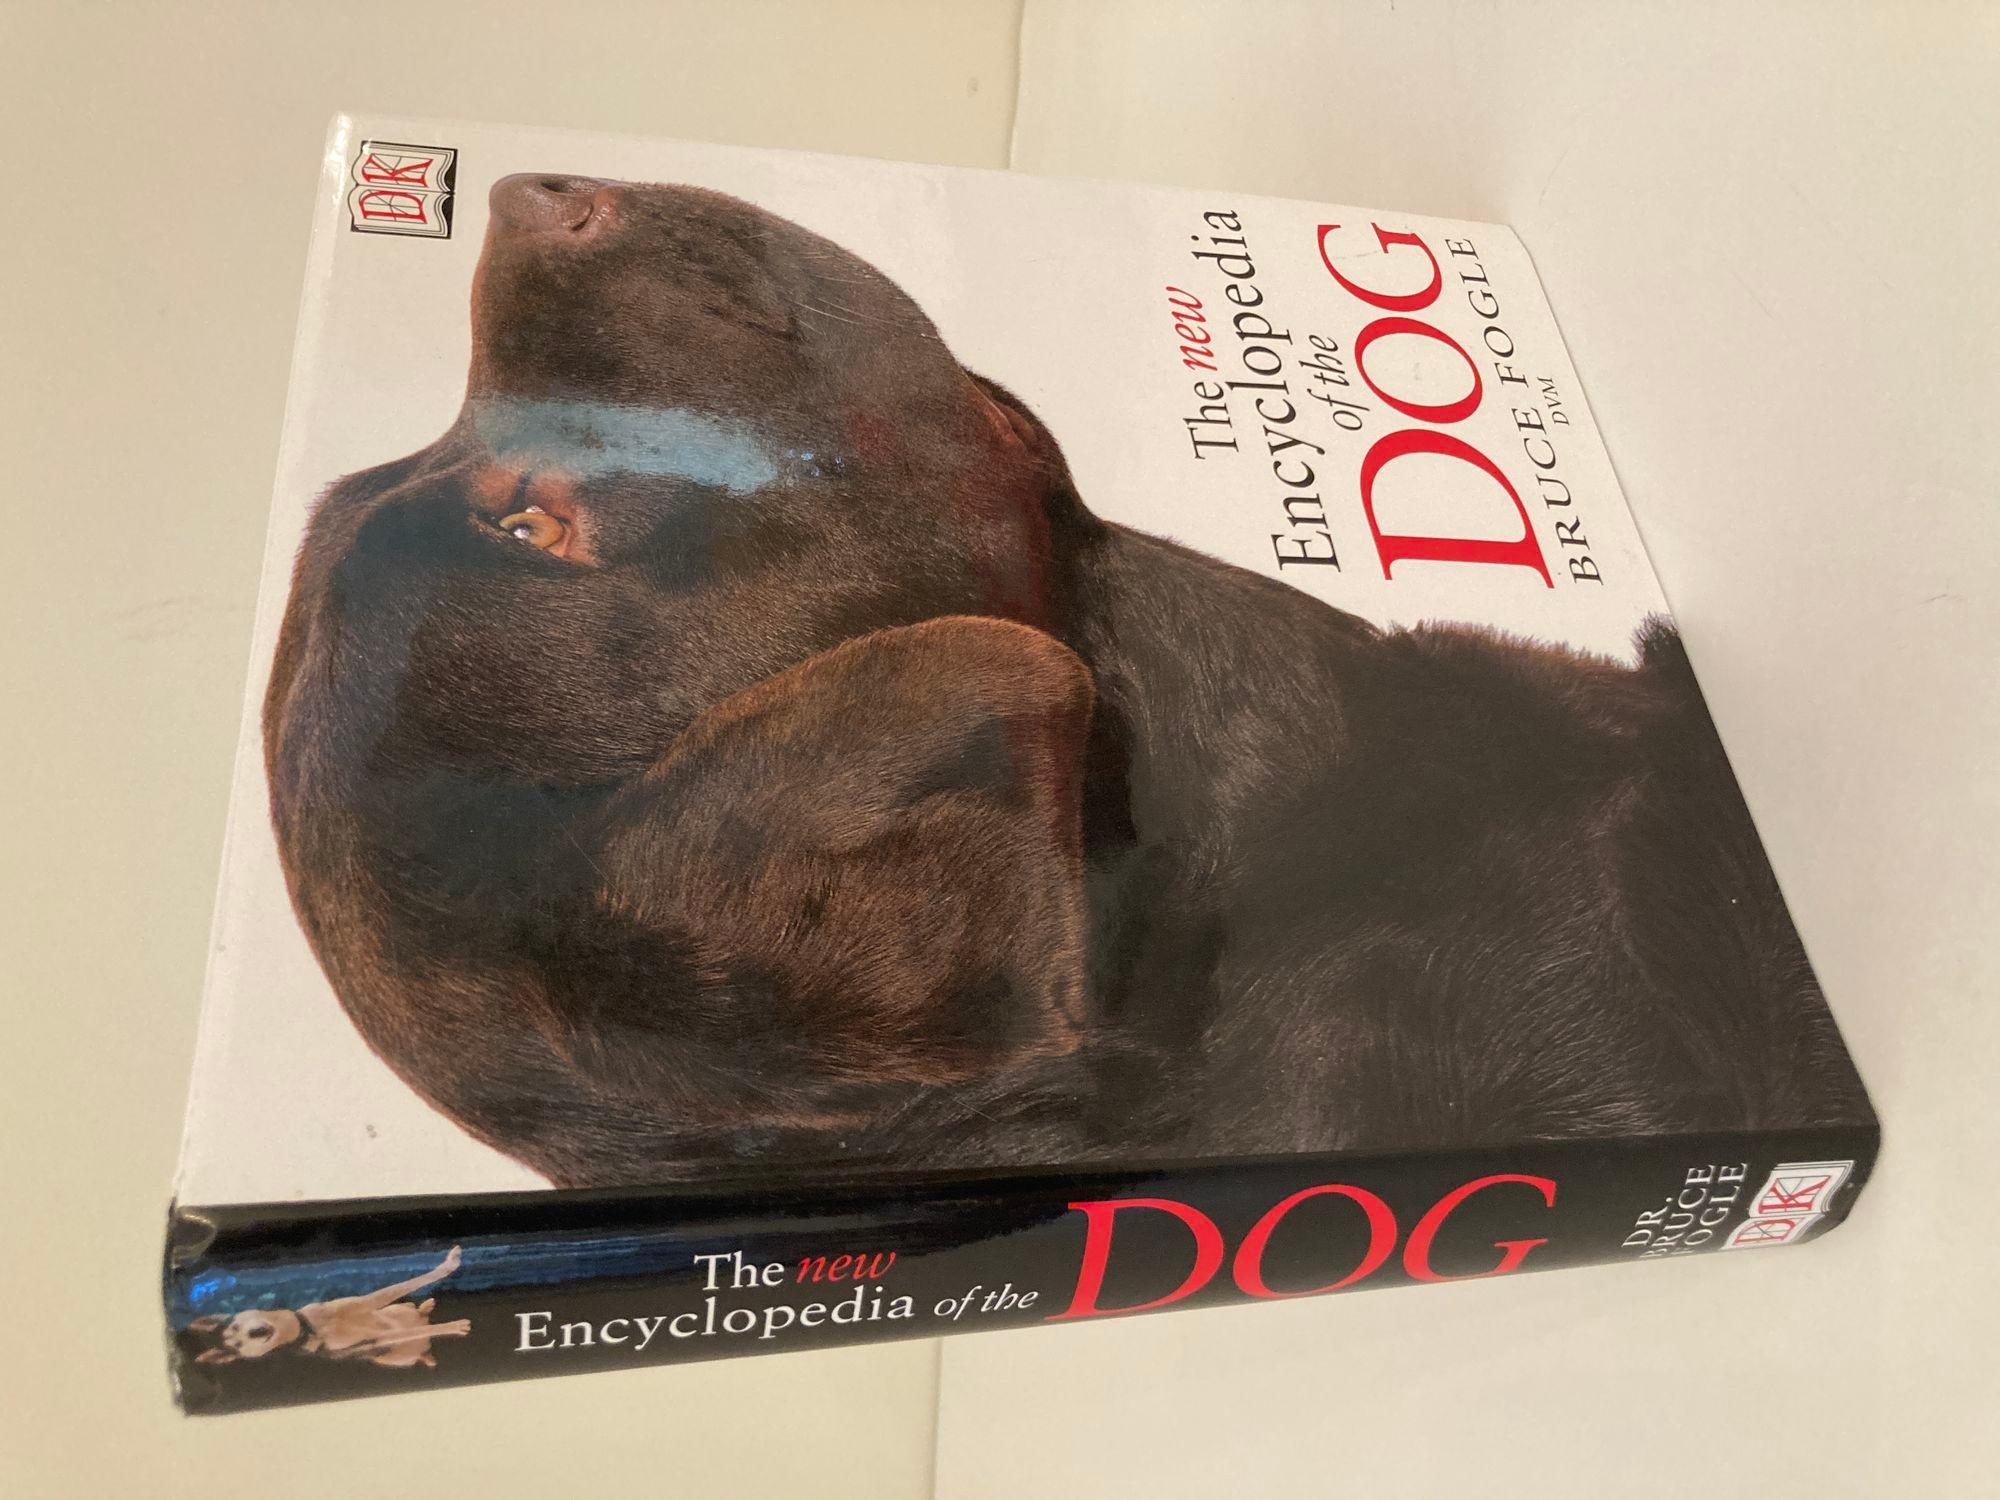 New Encyclopedia of Dog Hardcover Book by Bruce Fogle For Sale 10